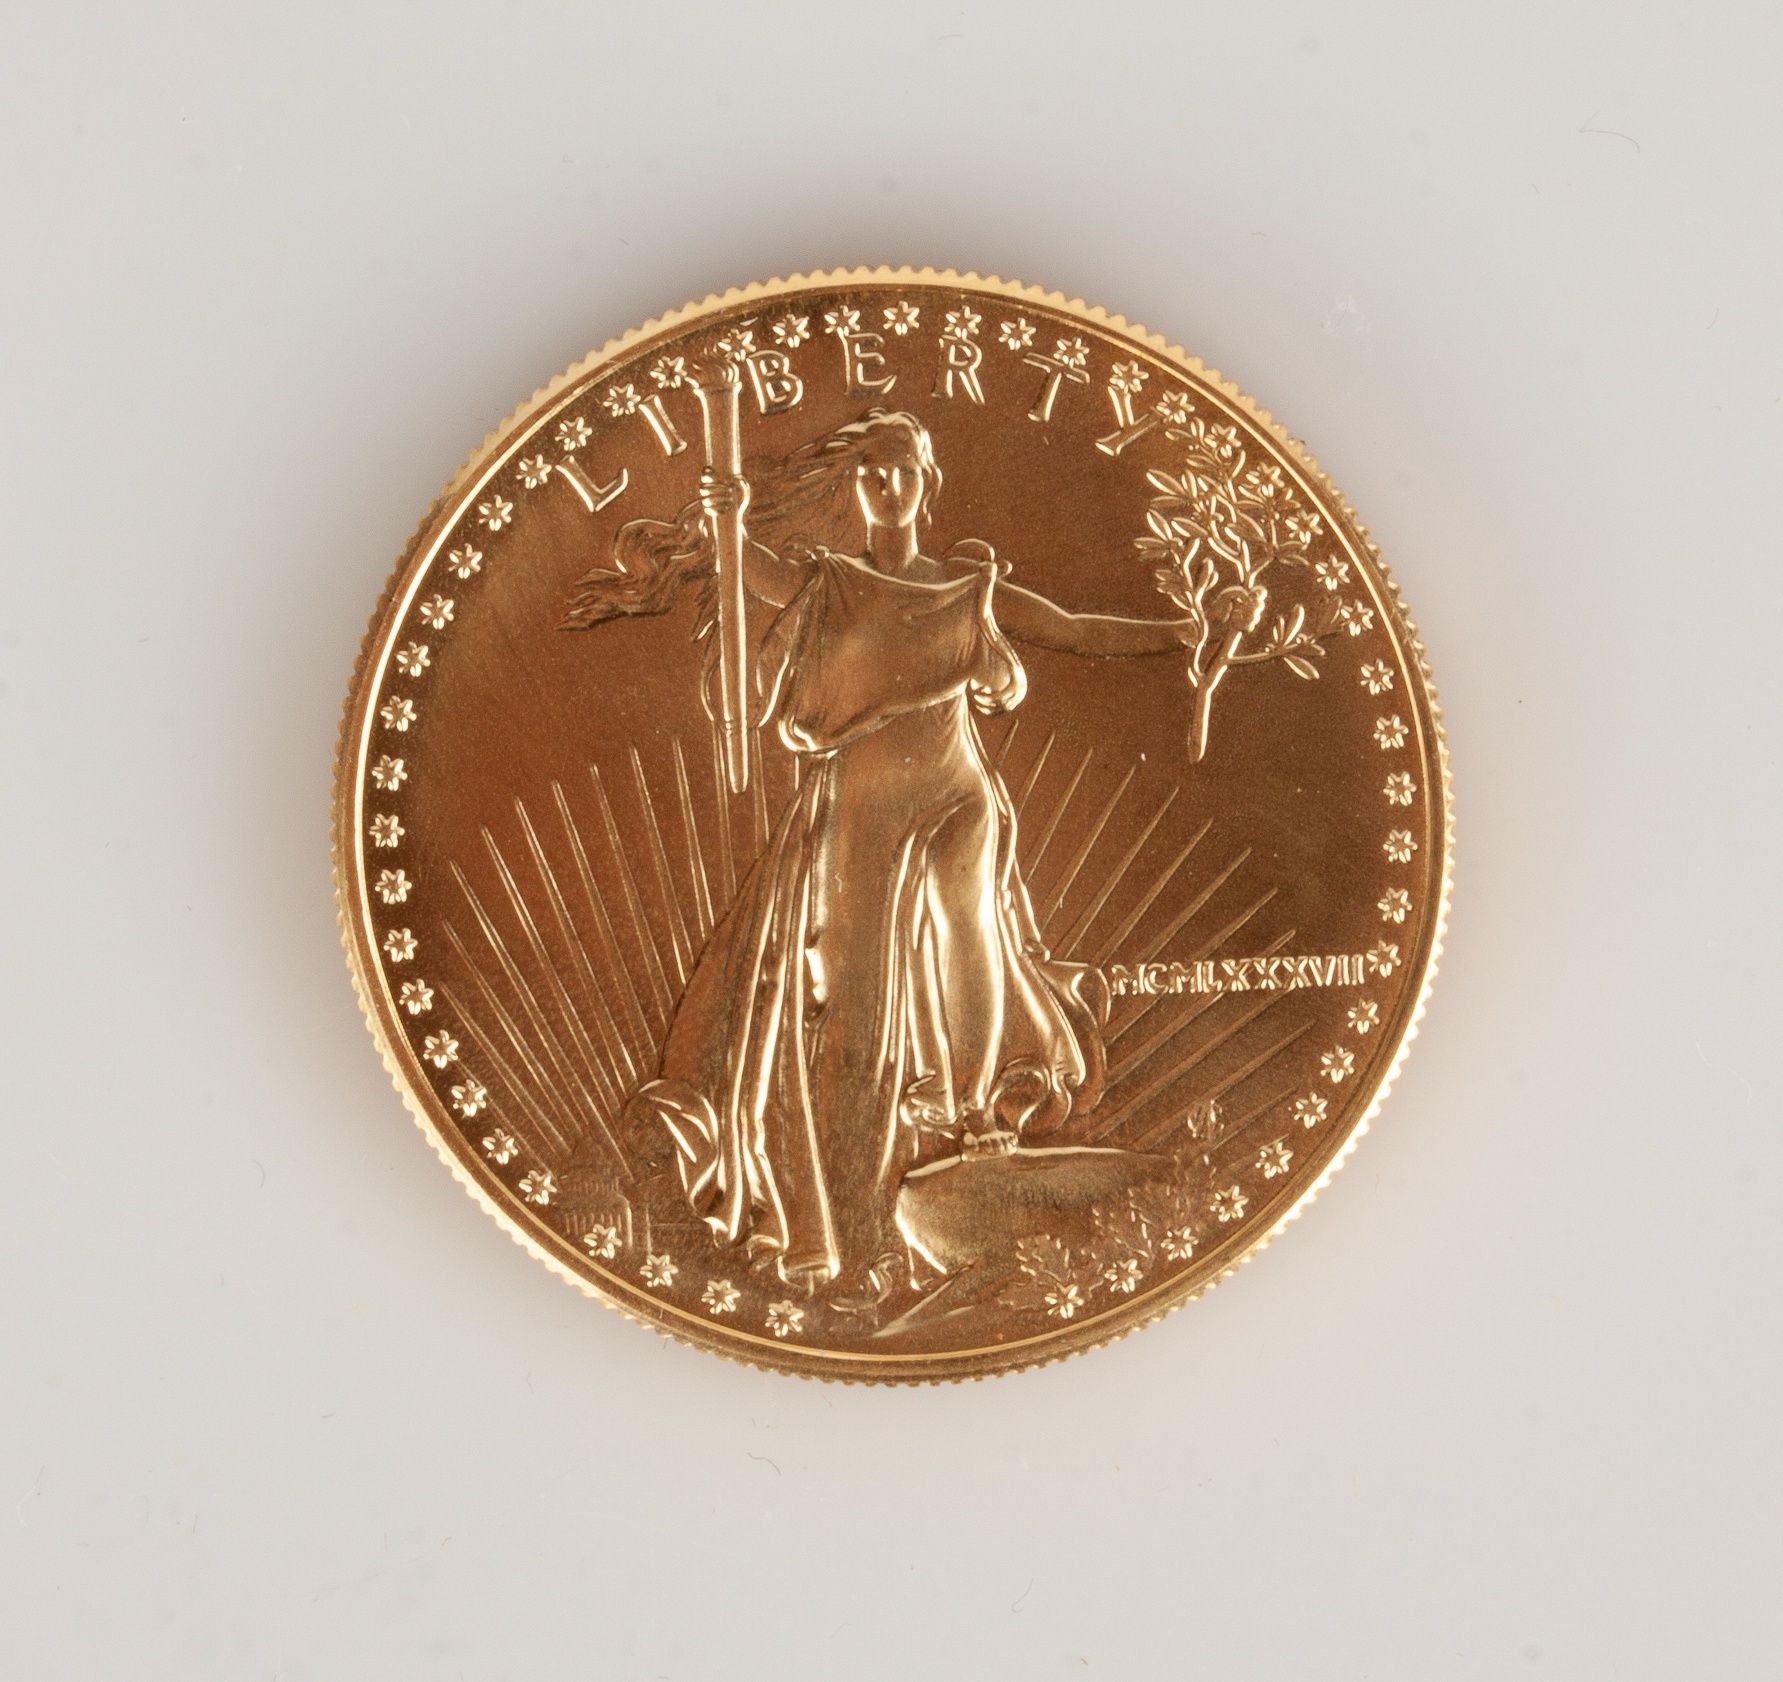 US Liberty MCMLXXXVII One Ounce Gold Coin Cottone Auctions